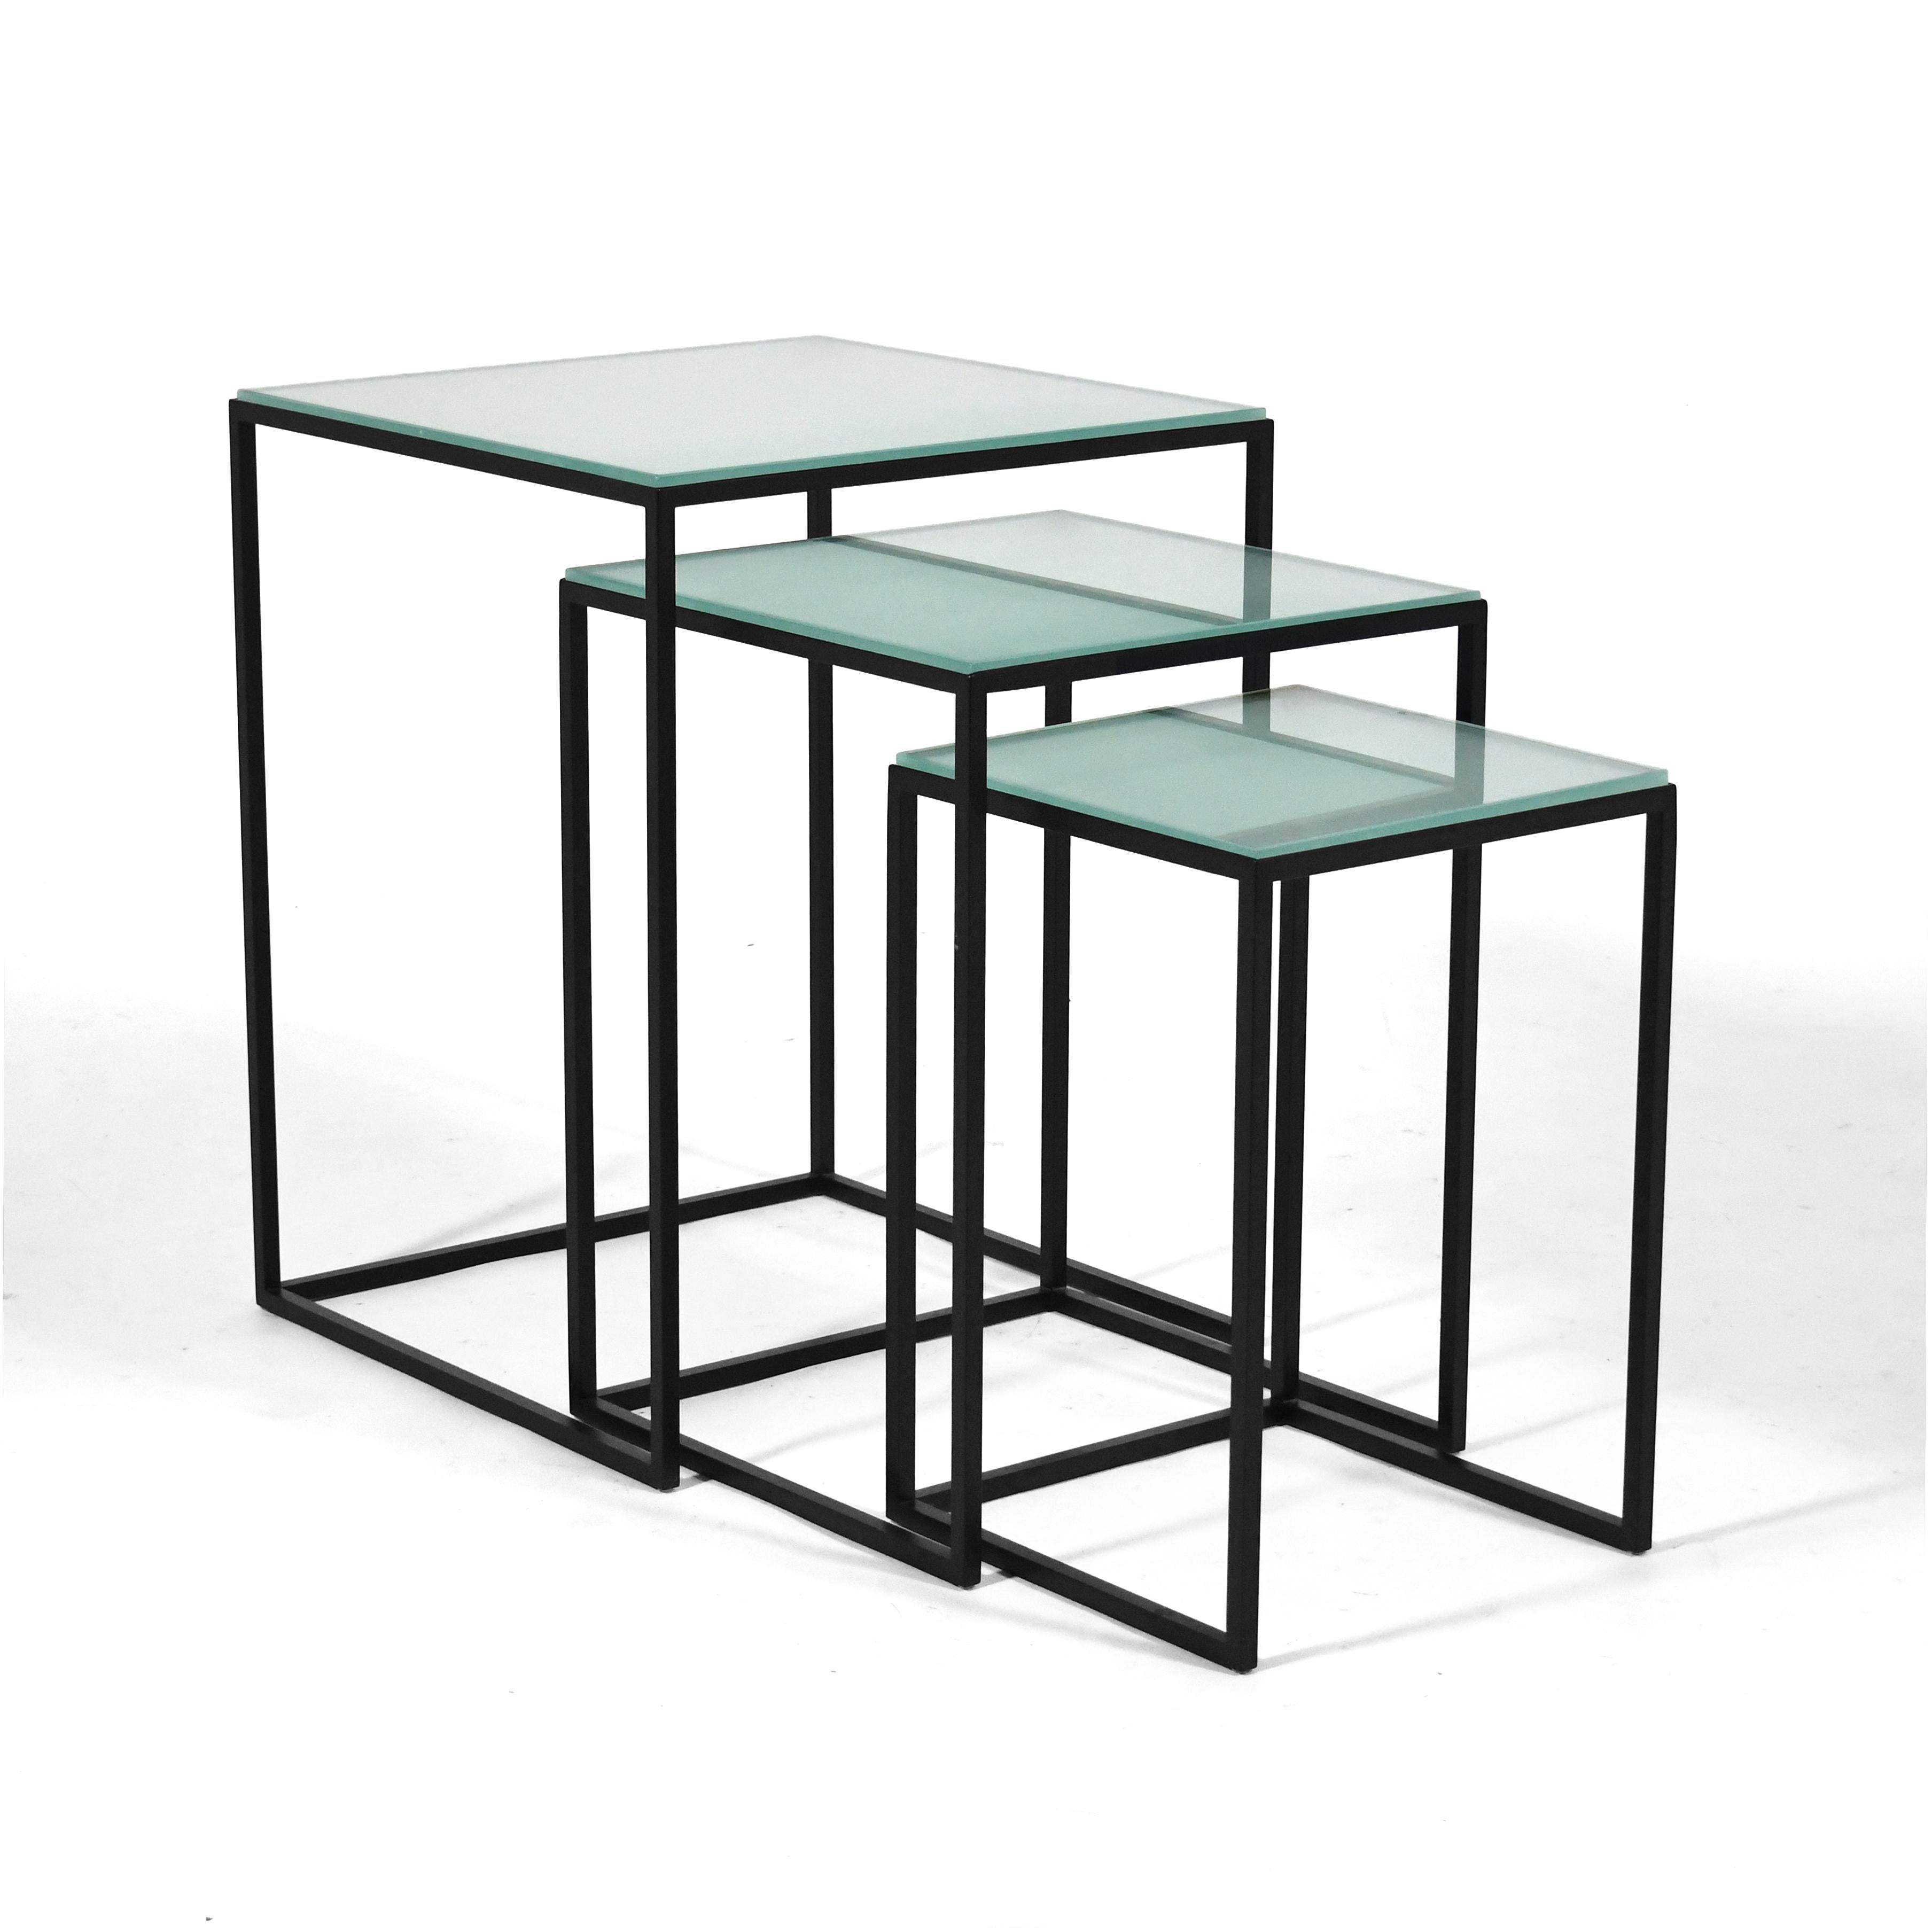 This set of nesting tables by Donghia have a striking minimalist design with frames of iron with a black finish that support tops of frosted glass.

24